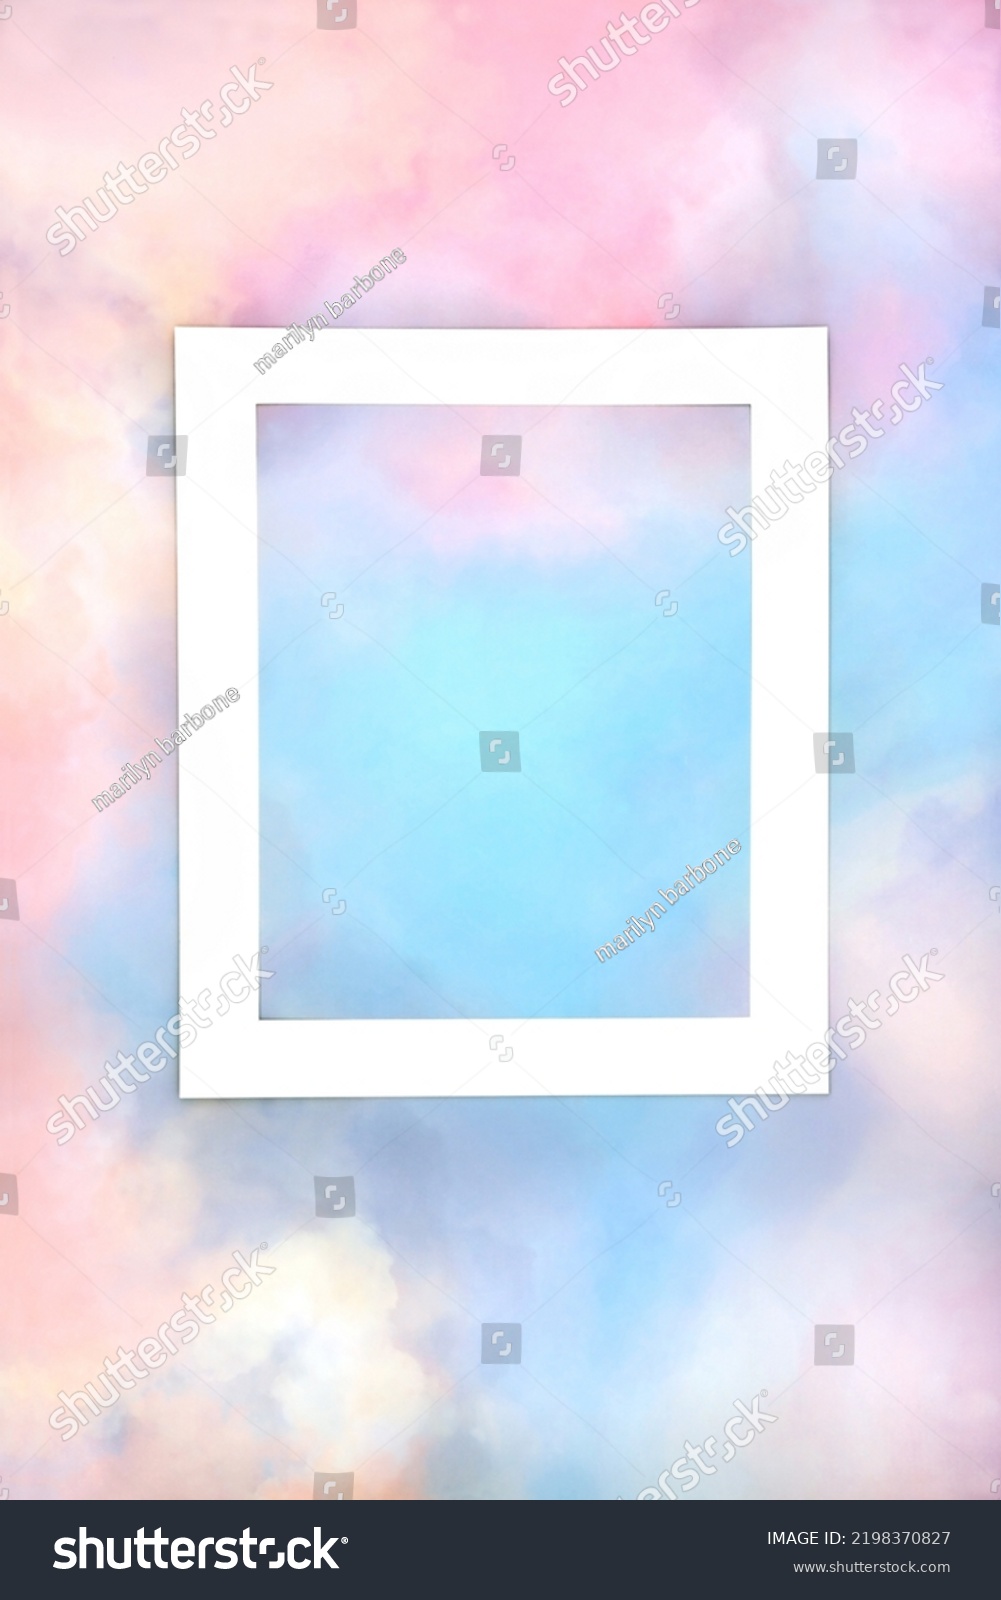 Rainbow sky cloud background with white frame. Abstract colourful minimal pastel coloured border design. LGBT themed nature concept.  #2198370827